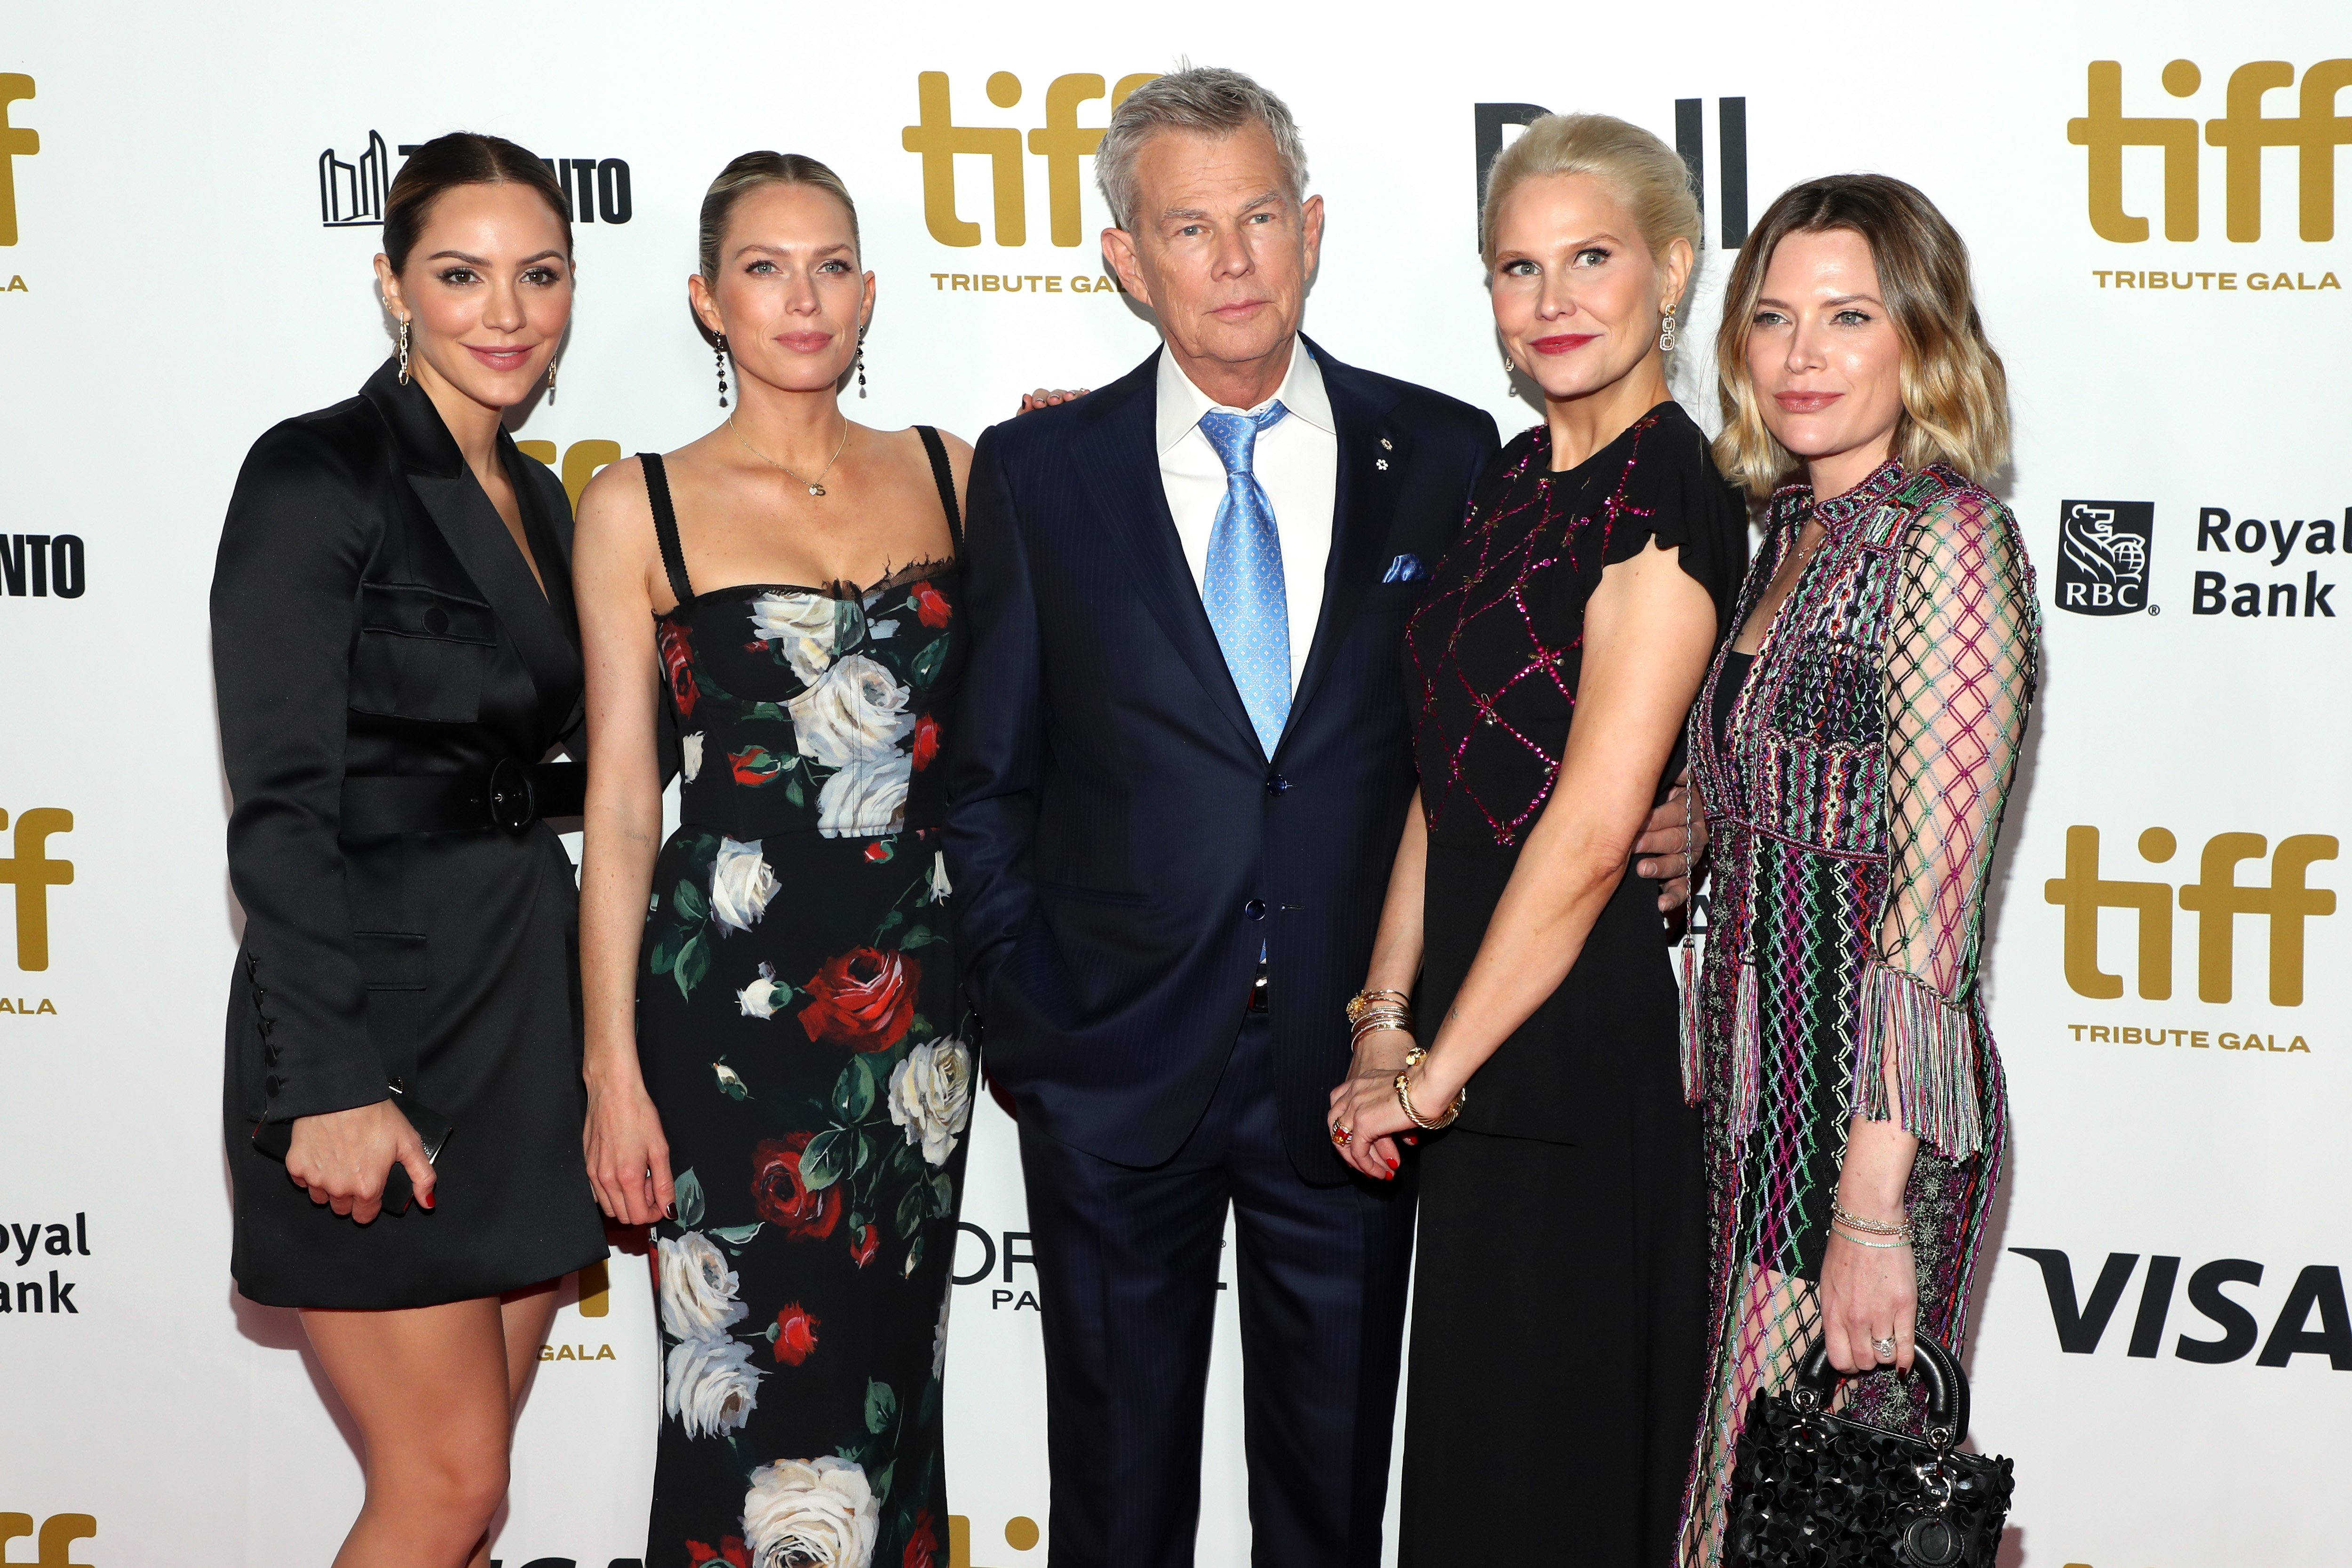 Amy Foster, Erin Foster, David Foster, Katherine McPhee, and Jordan Foster pose on the red carpet at the "David Foster: Off The Record" premiere during the 2019 Toronto International Film Festival at The Elgin on September 9, 2019, in Toronto, Canada | Source: Getty Images